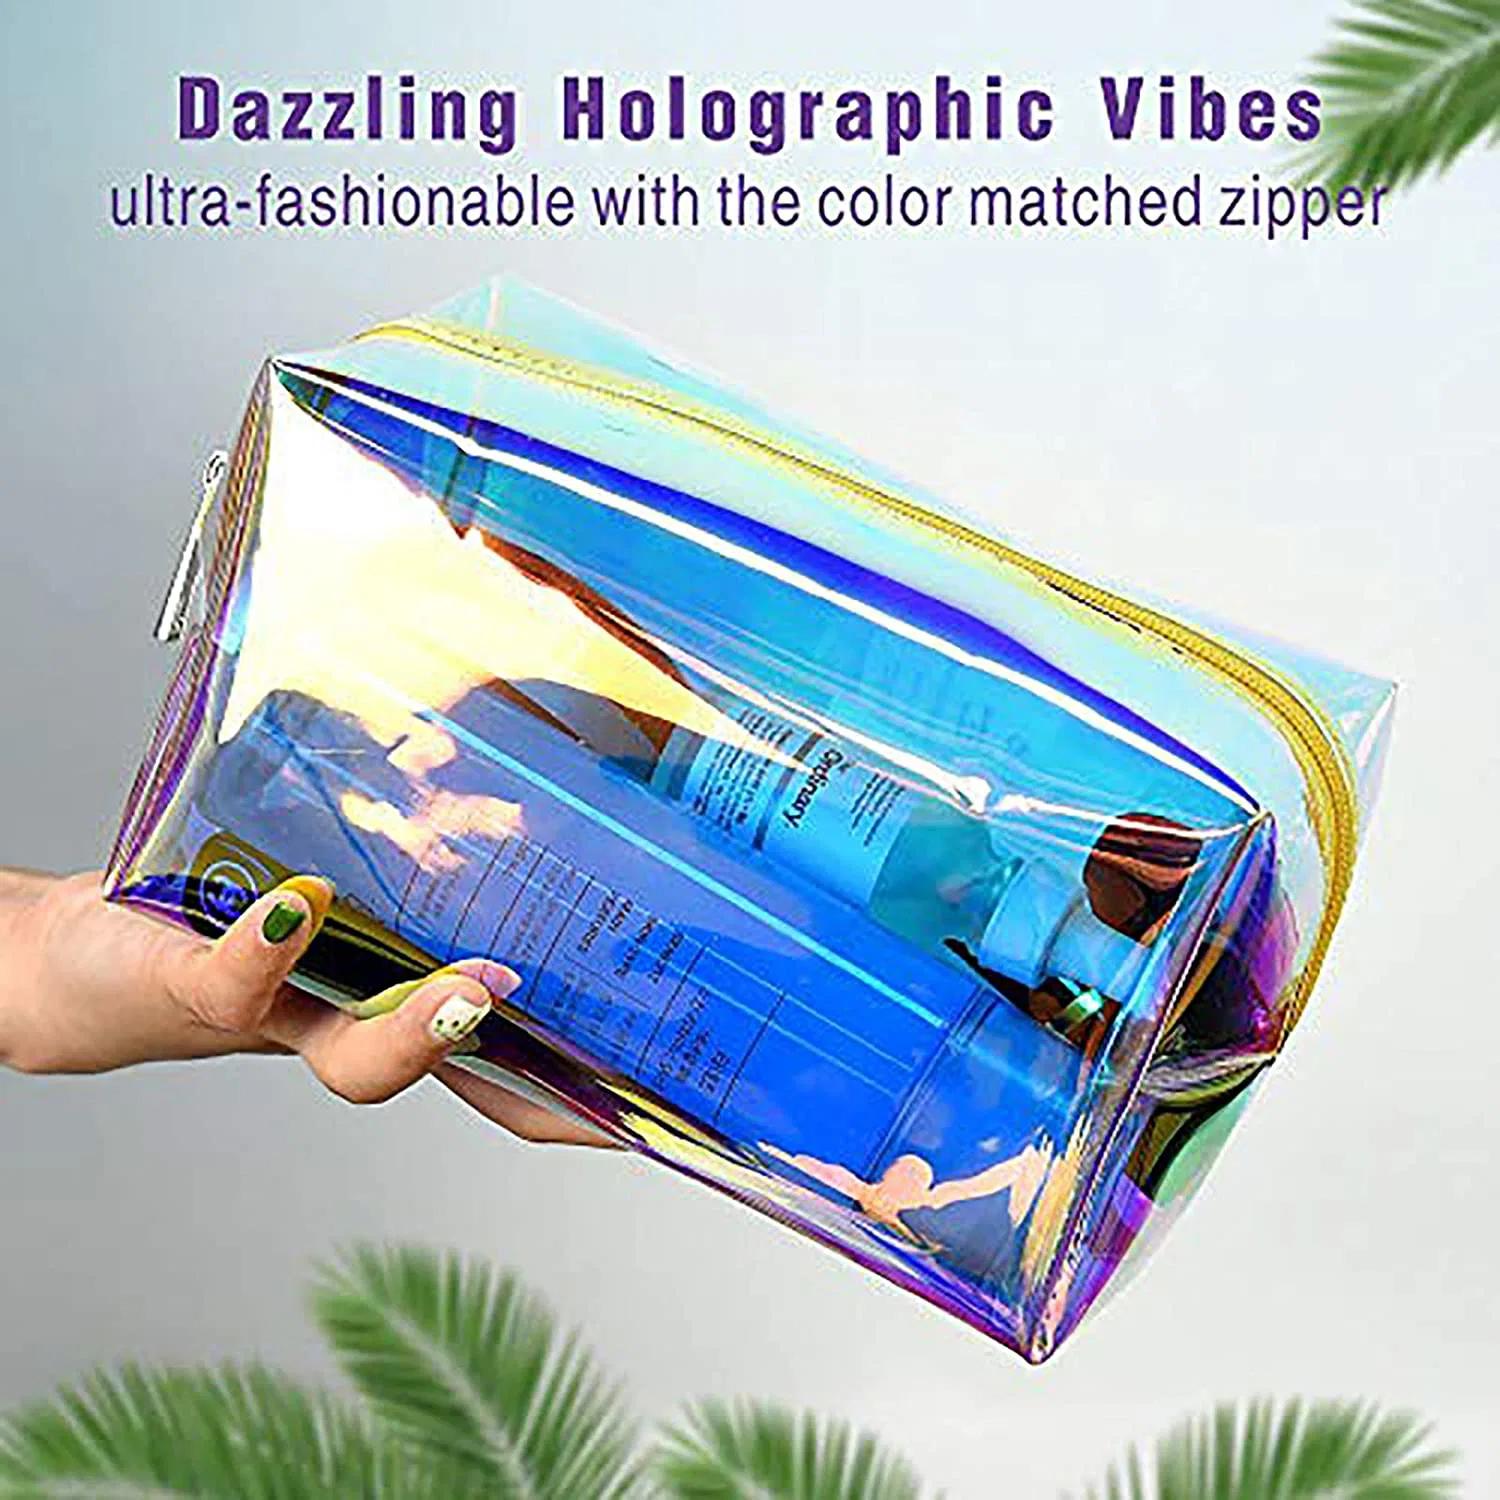 Fashion Holographic Travel Large Toiletry Makeup Organizer Cosmetic Bag